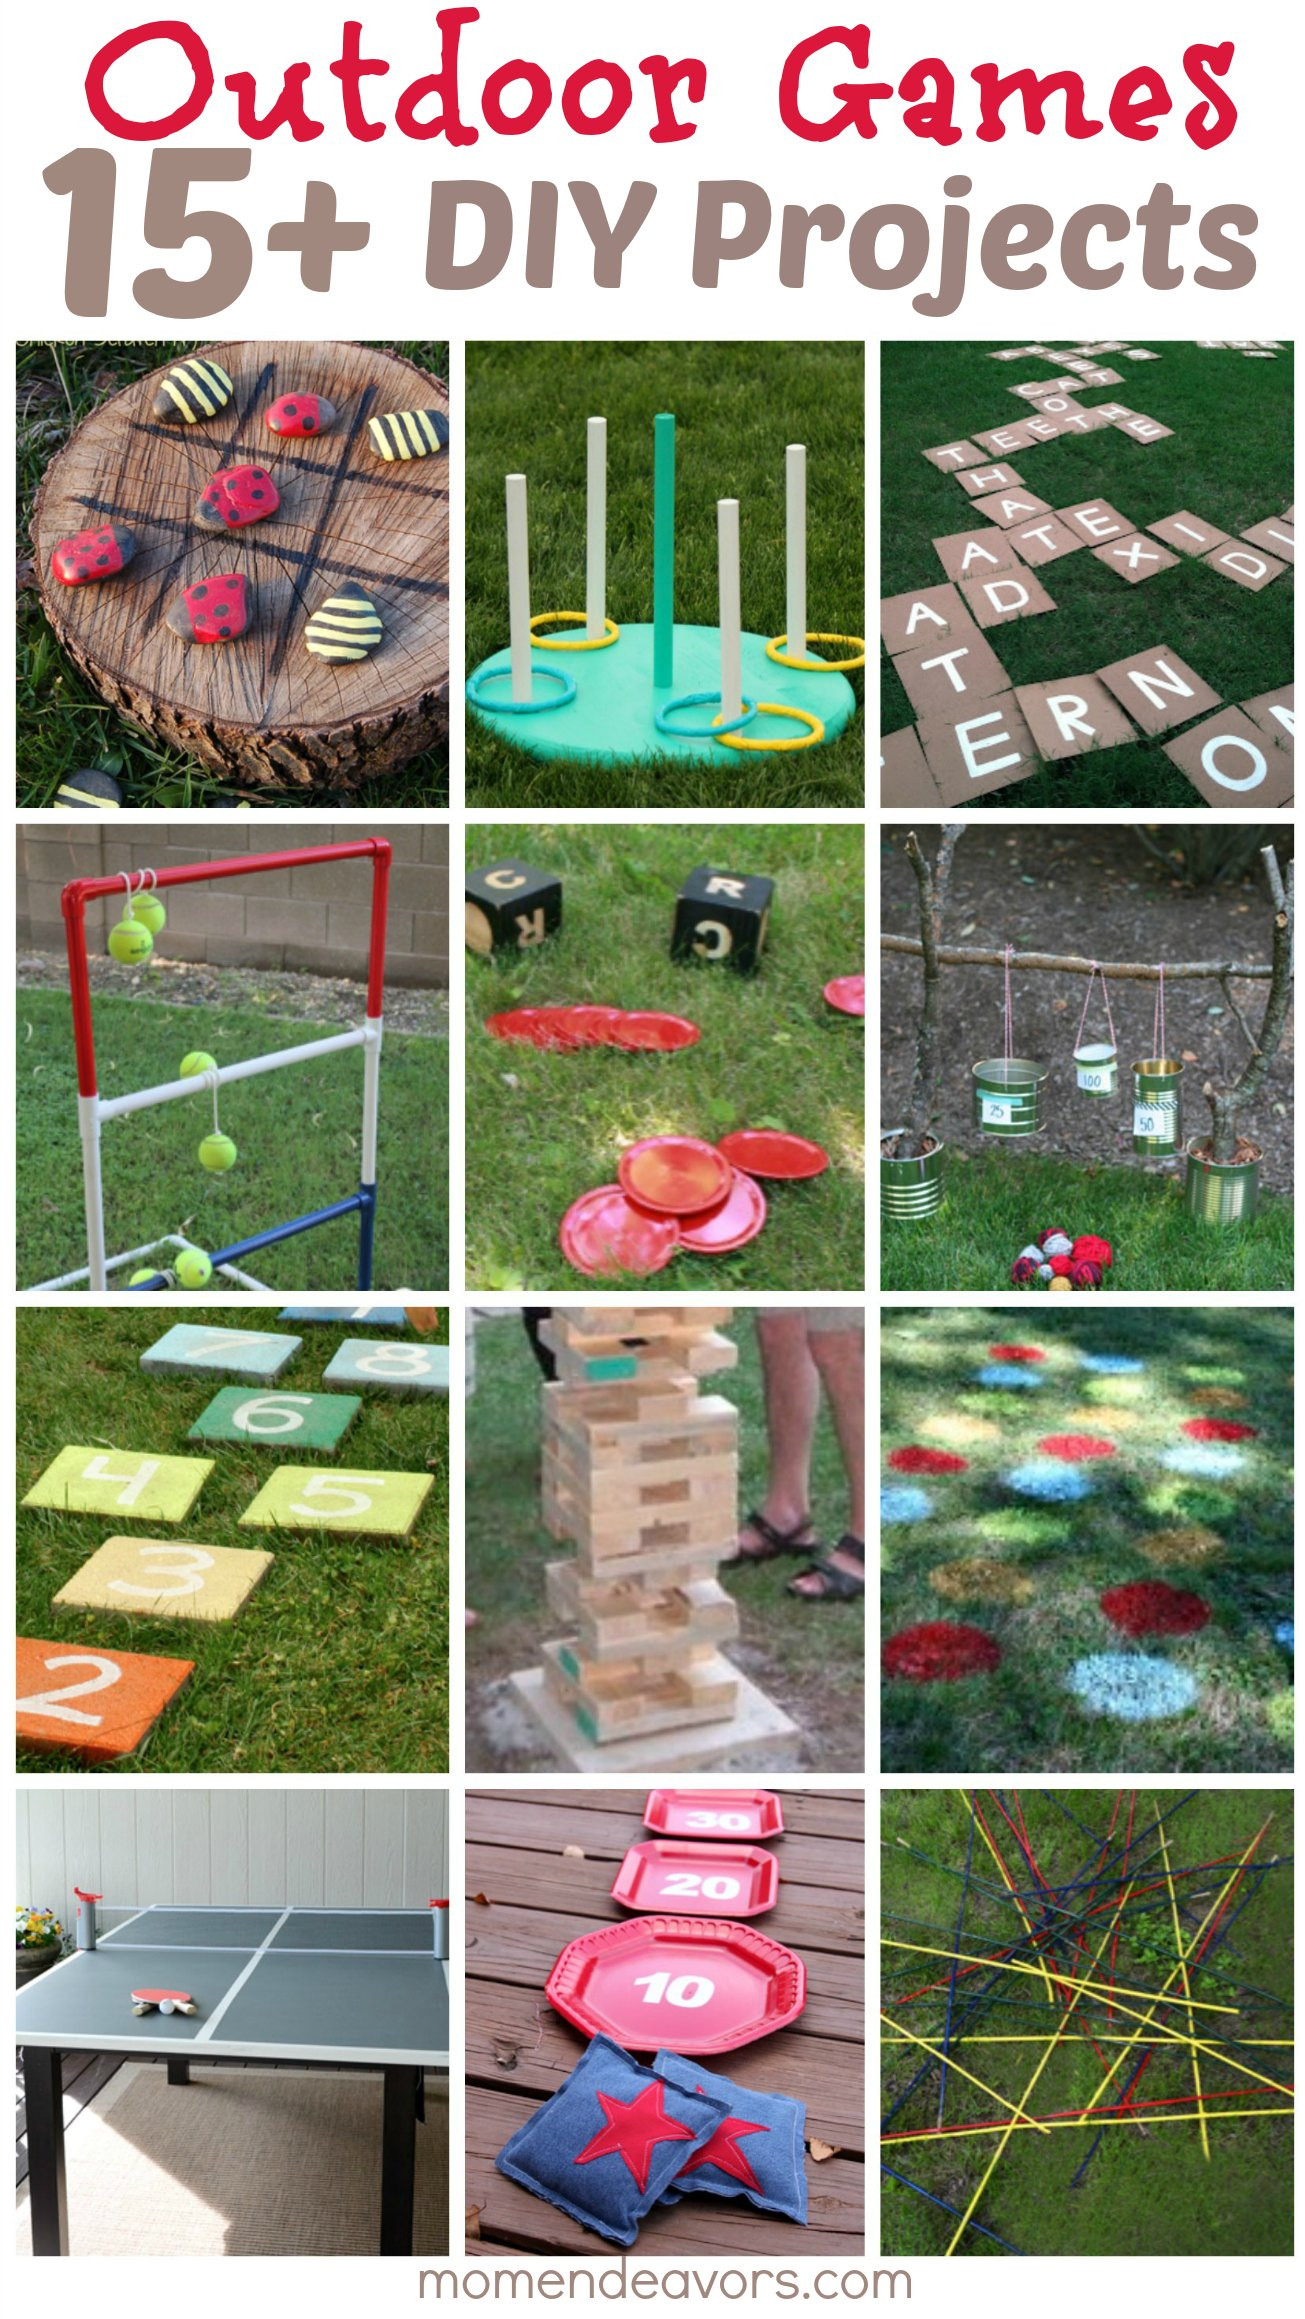 Outdoor Games For Kids
 DIY Outdoor Games – 15 Awesome Project Ideas for Backyard